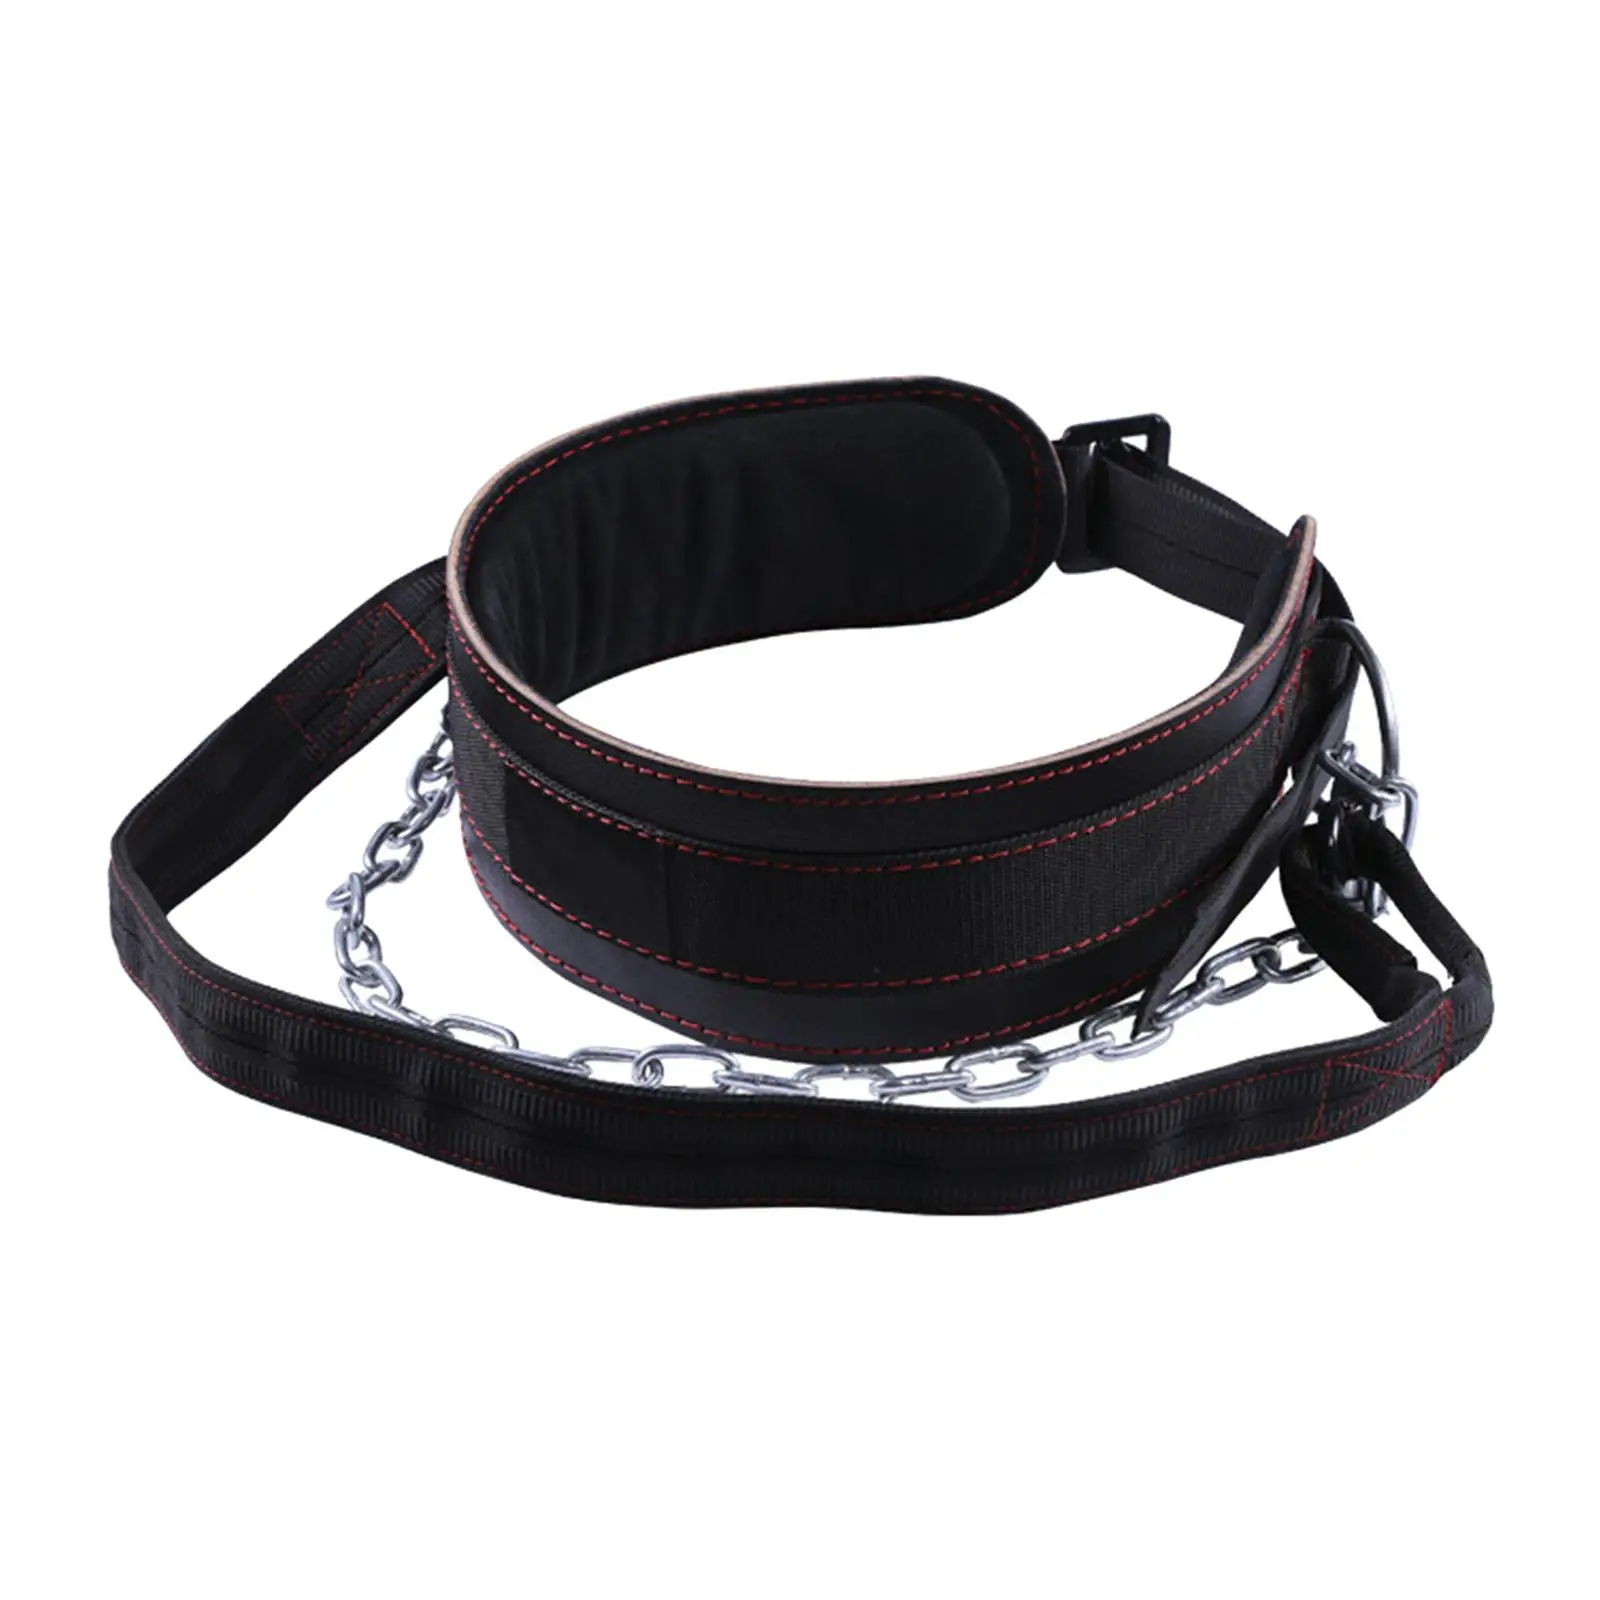 Pull Ups Belt with Lifting Chain Comfortable Heavy Duty Exercise Weightlifting